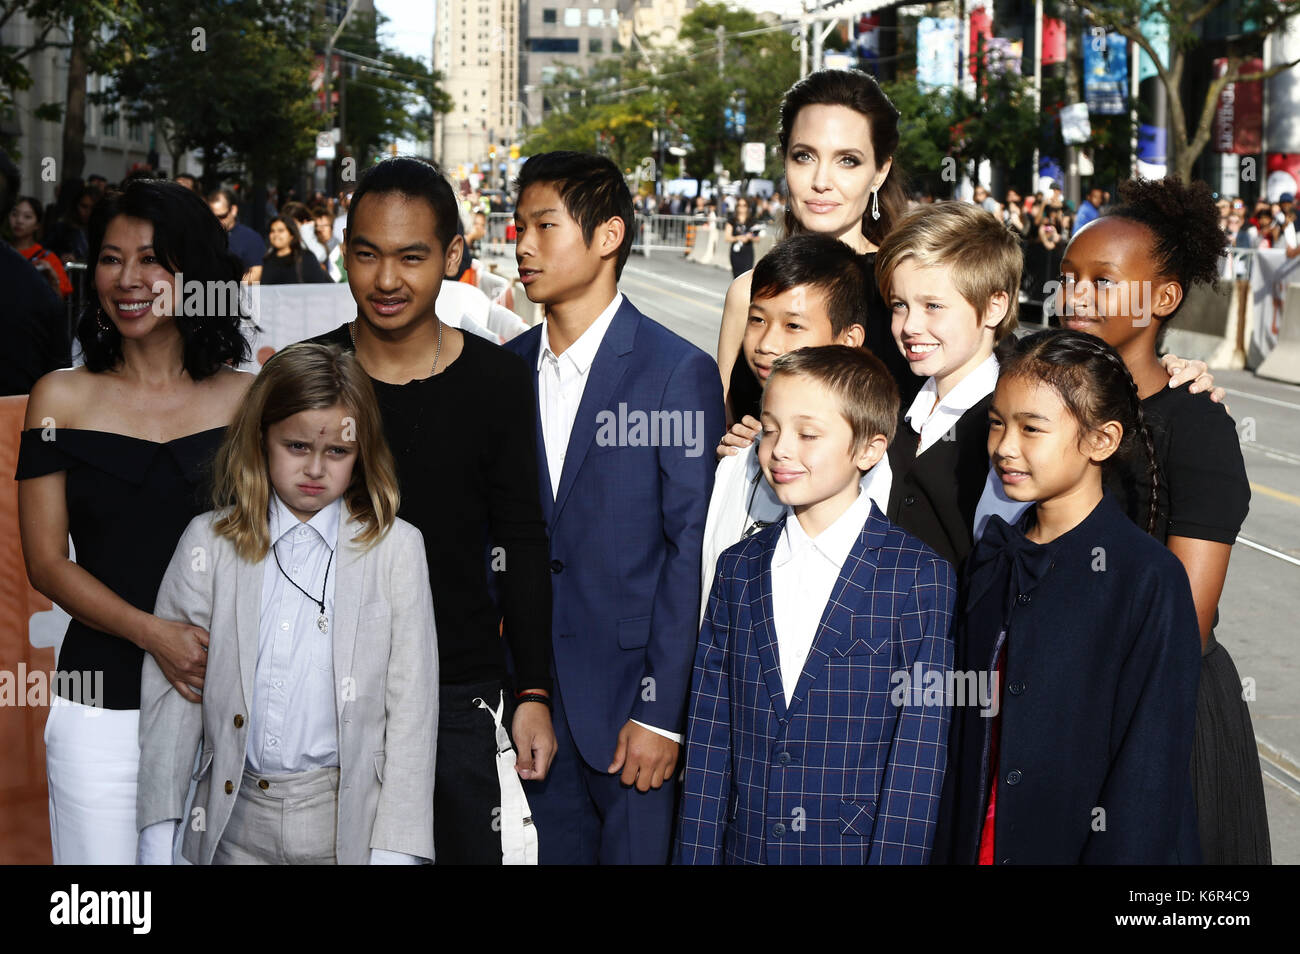 Toronto, Kanada. 11th Sep, 2017. Loung Ung, Vivienne Marcheline Jolie-Pitt, Maddox Jolie-Pitt, Pax Thien Jolie-Pitt, Kimhak Mun, Knox Leon Jolie-Pitt, Shiloh Jolie-Pitt, Angelina Jolie, Zahara Jolie-Pitt and Sareum Srey Moch attending the 'First They Killed My Father: A Daughter of Cambodia Remembers' premiere during the 42nd Toronto International Film Festival at Princess of Wales Theatre on September 11, 2017 in Toronto, Canada | Verwendung weltweit/picture alliance Credit: dpa/Alamy Live News Stock Photo